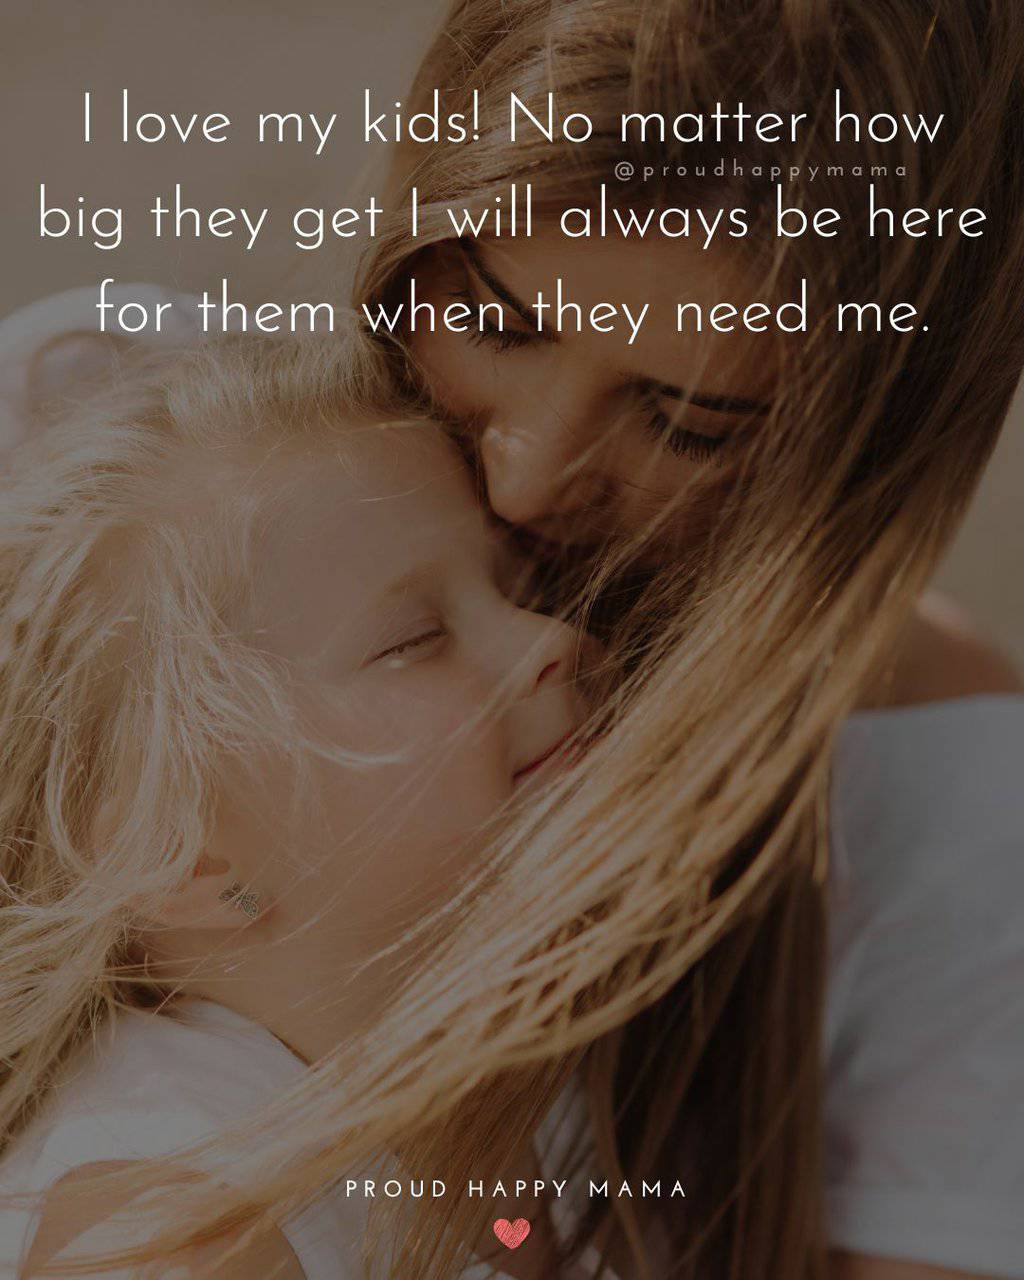 I love my kids! No matter how big they get I will always be here for them when they need me.